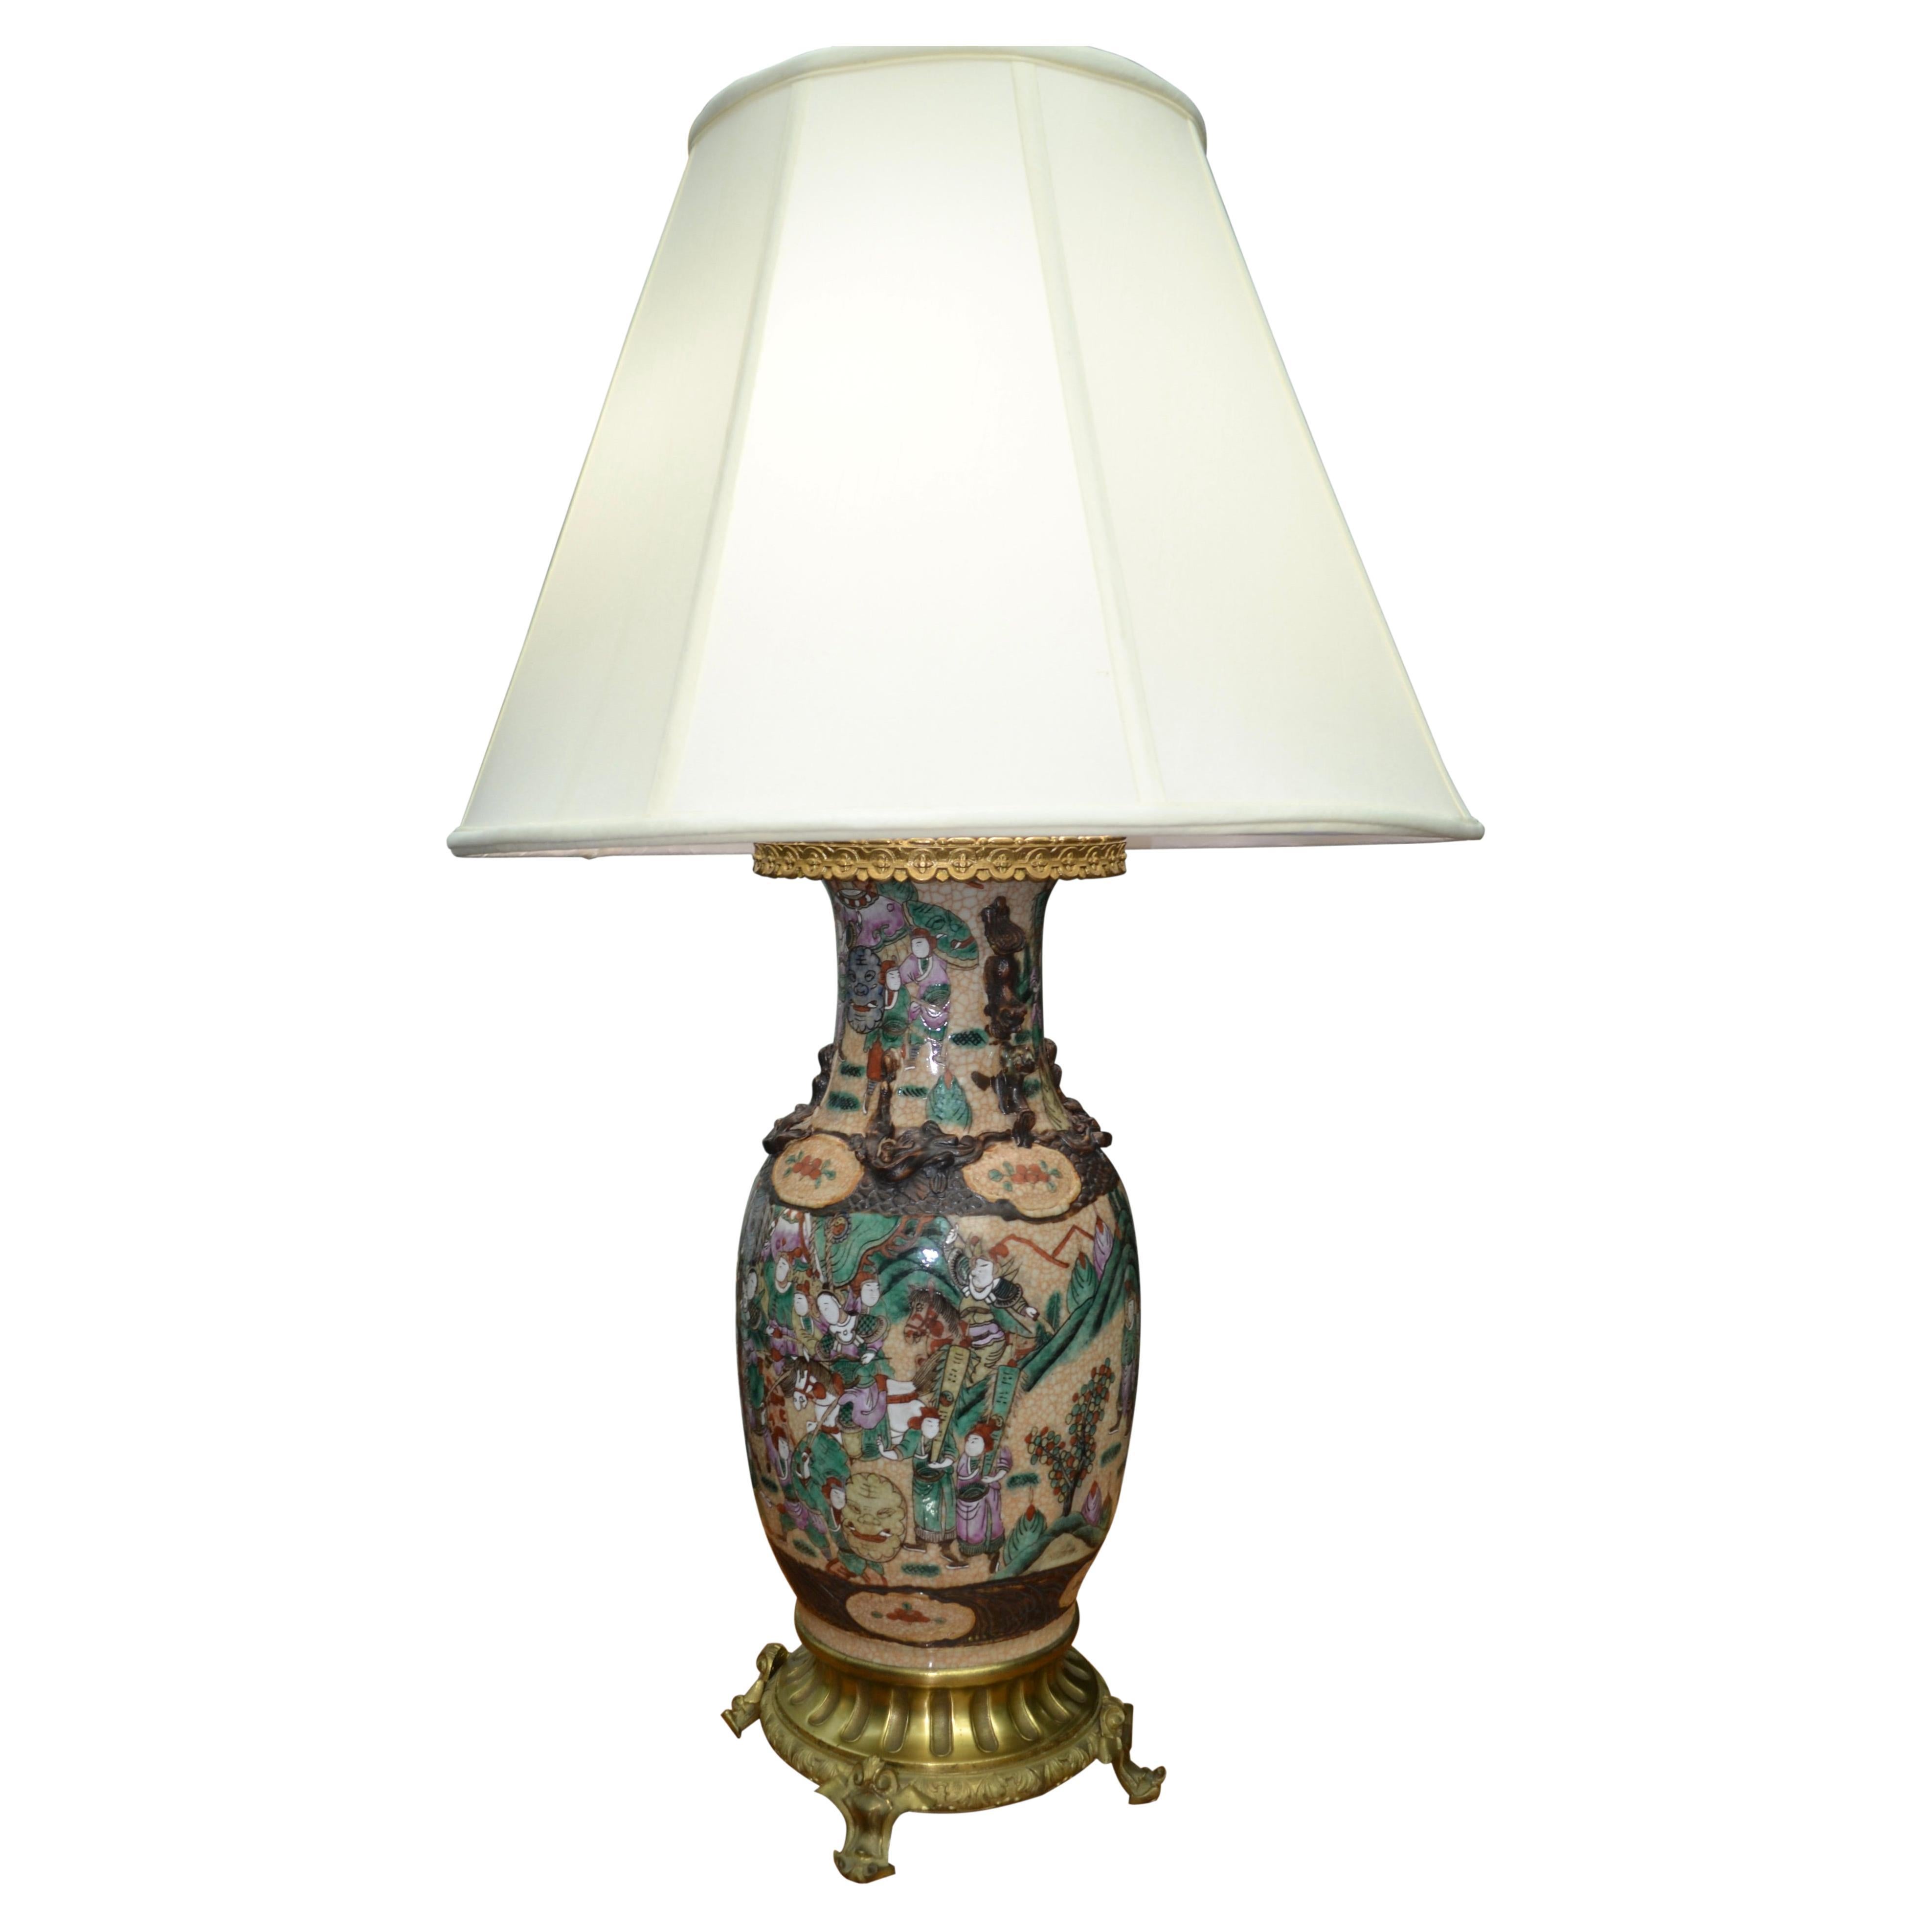  A 19 Century Nanking Porcelain Vase on an Ormolu base turned into a Lamp For Sale